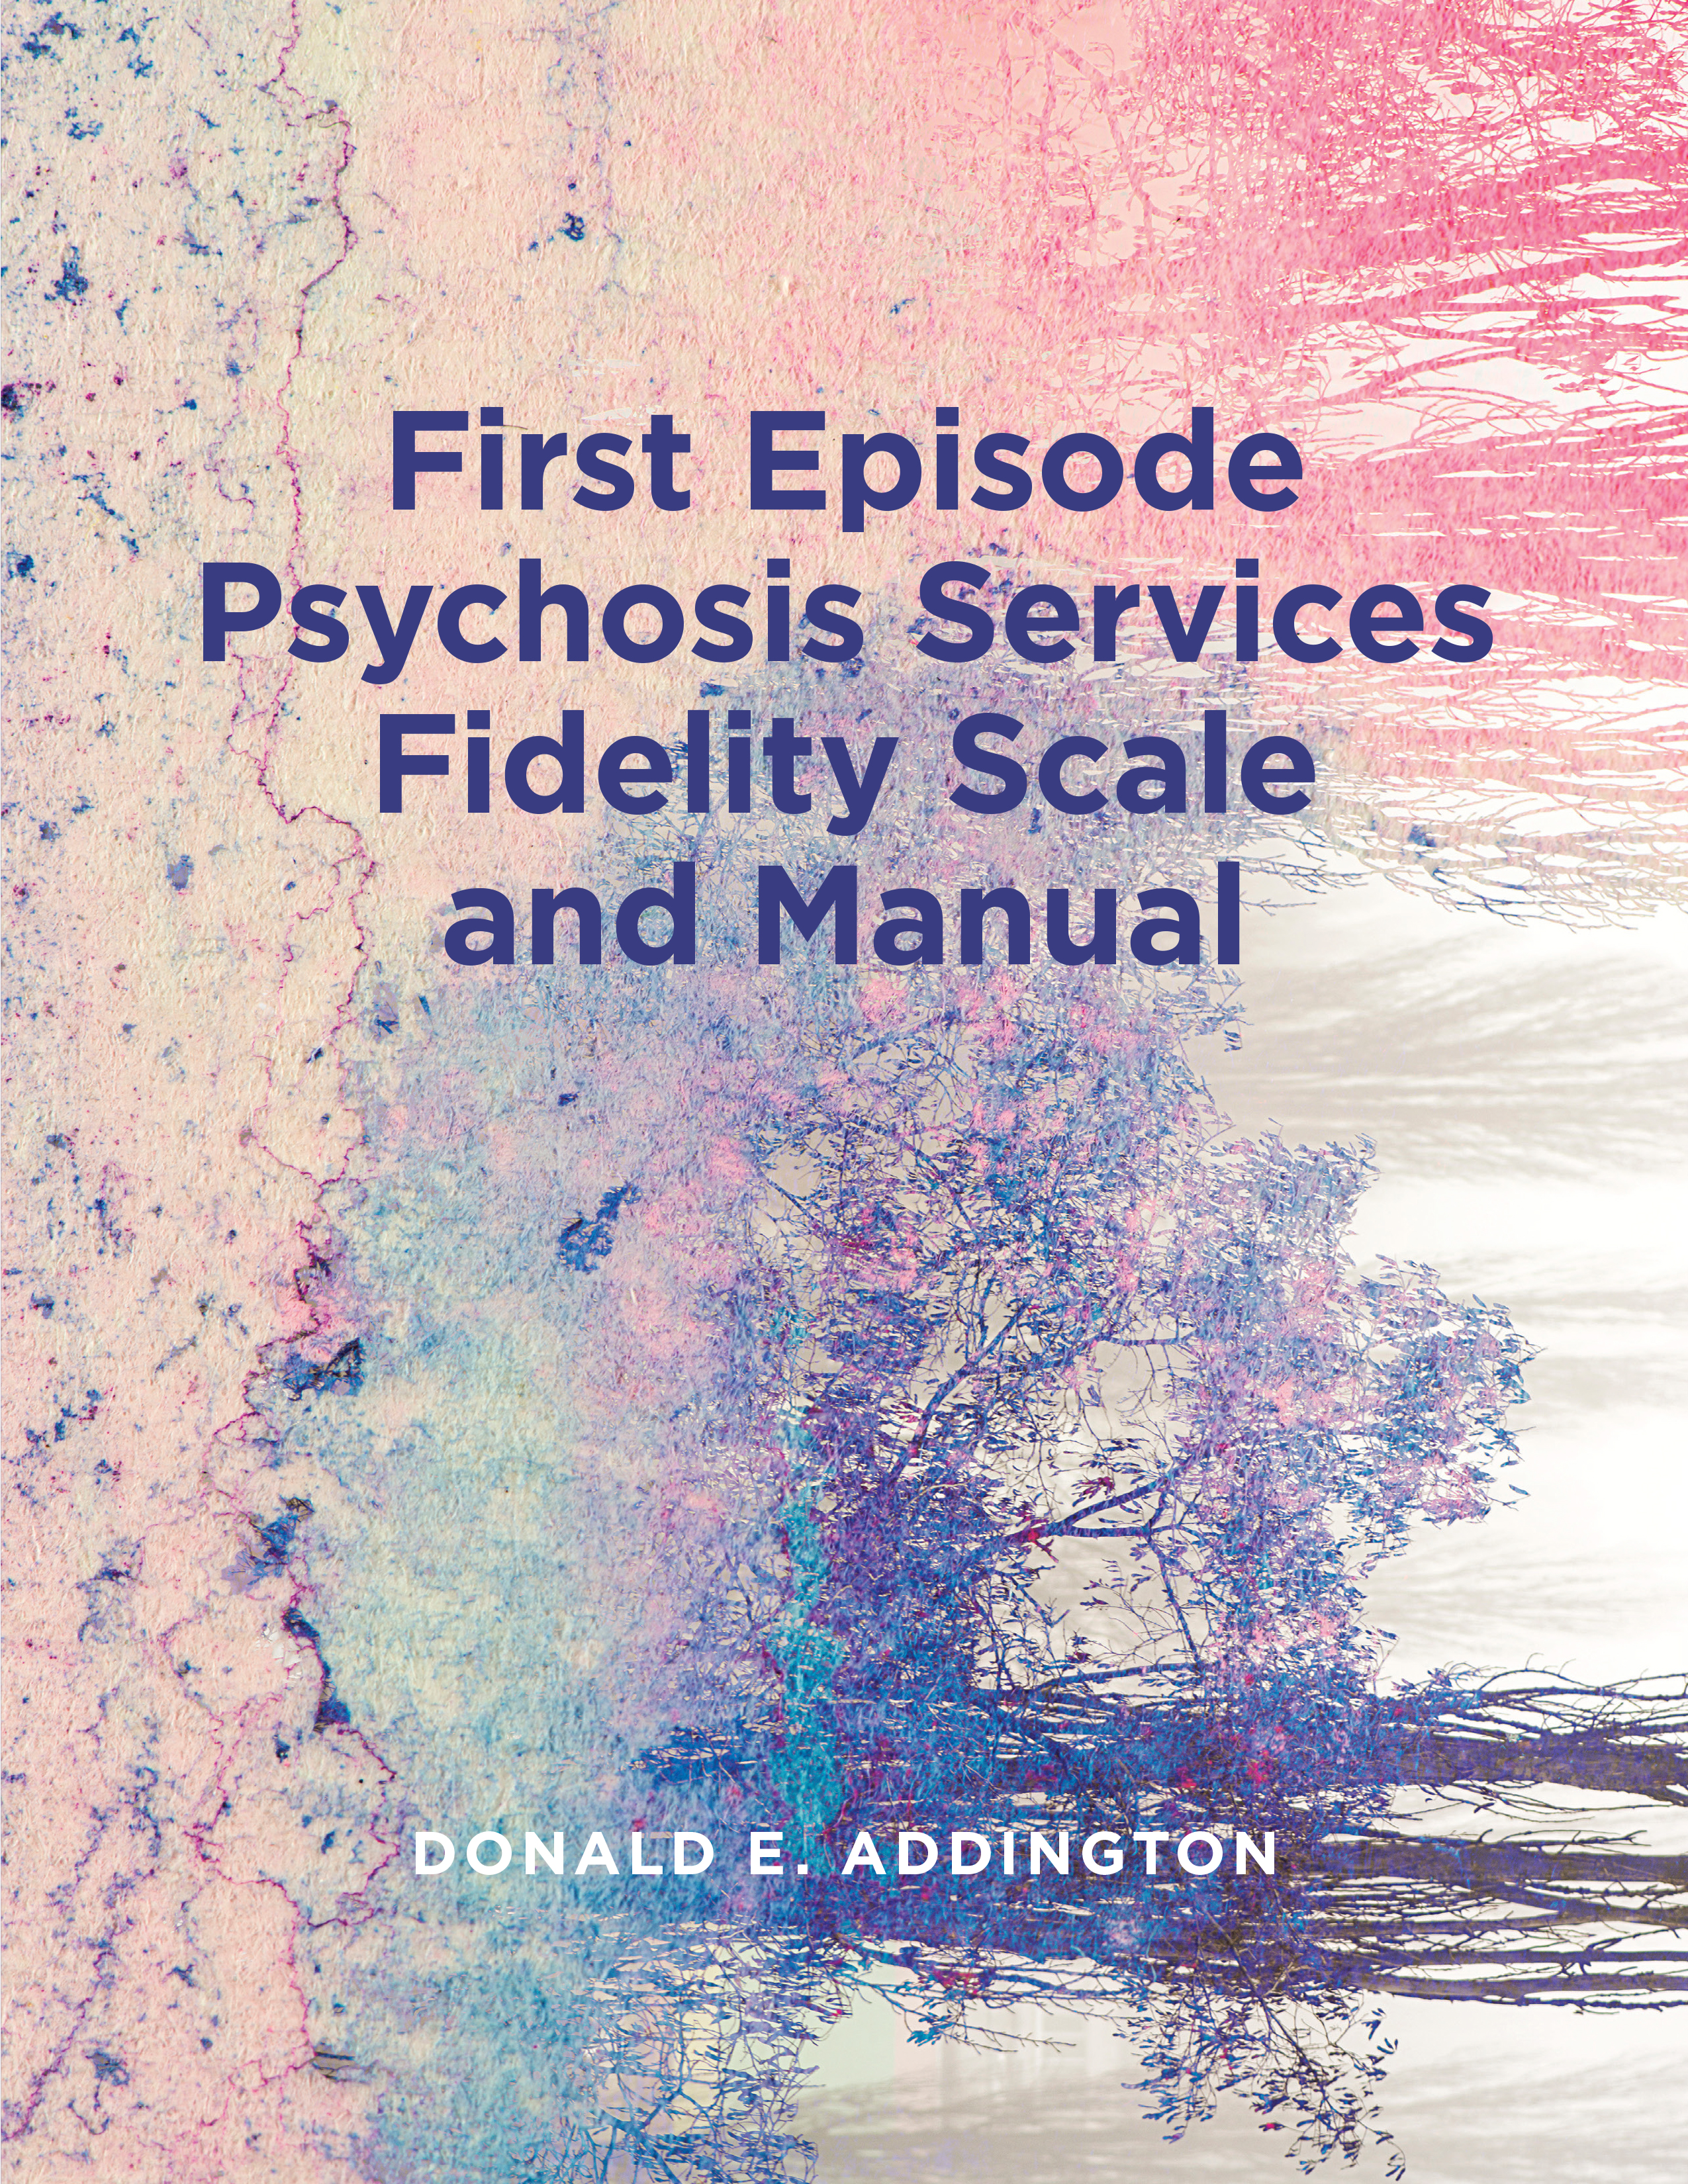 Cover Image for: First Episode Psychosis Services Fidelity Scale (FEPS-FS 1.0) and Manual